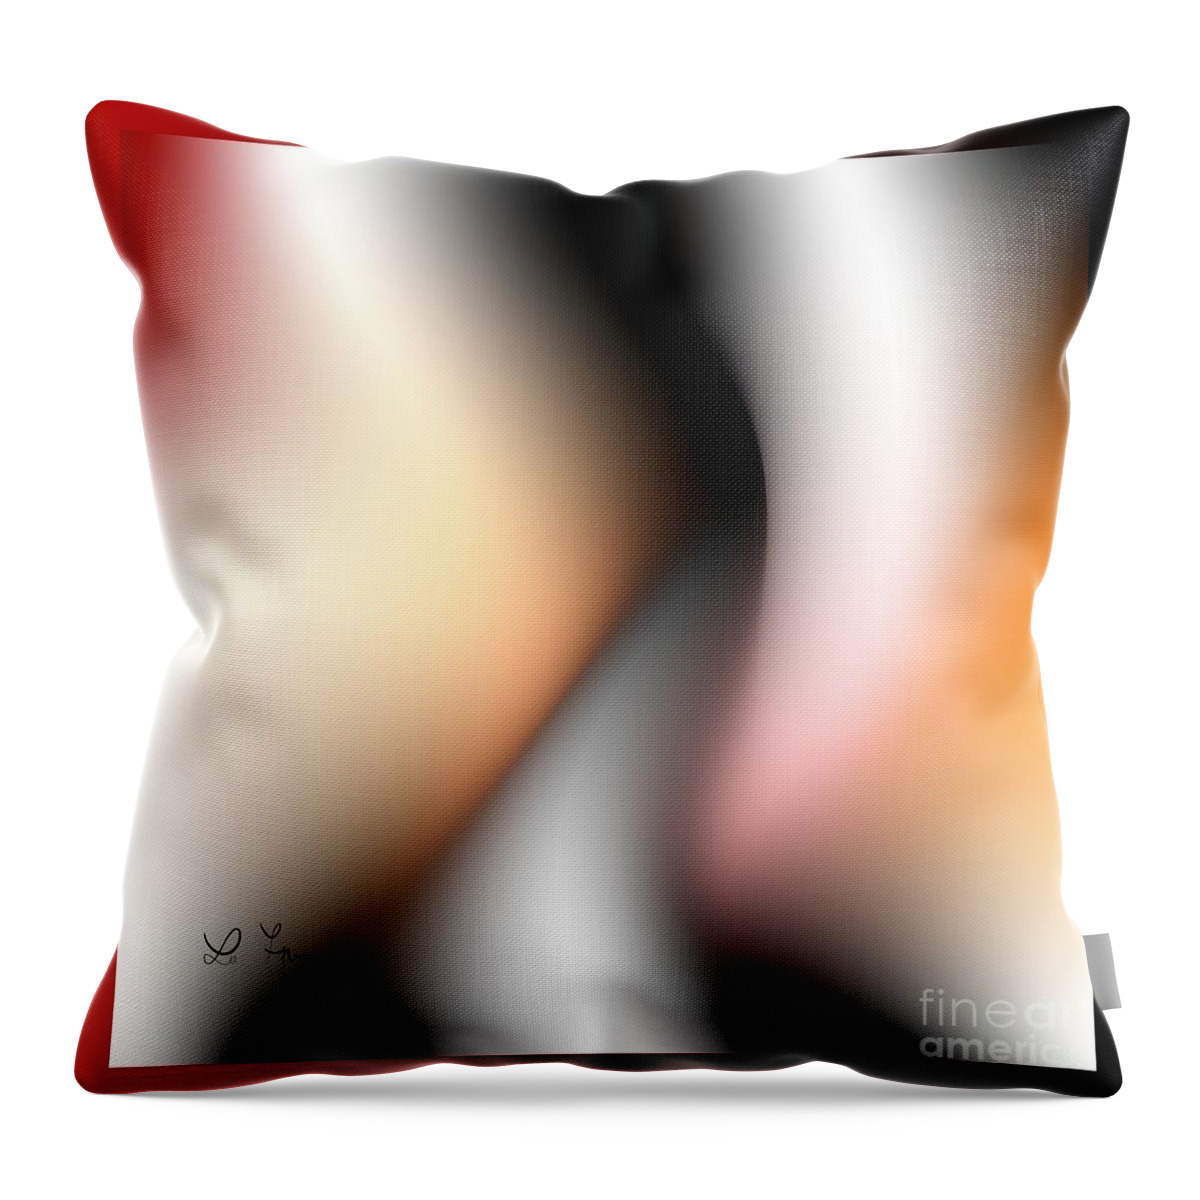 Silhouettes Throw Pillow featuring the digital art Silhouettes 1 by Leo Symon